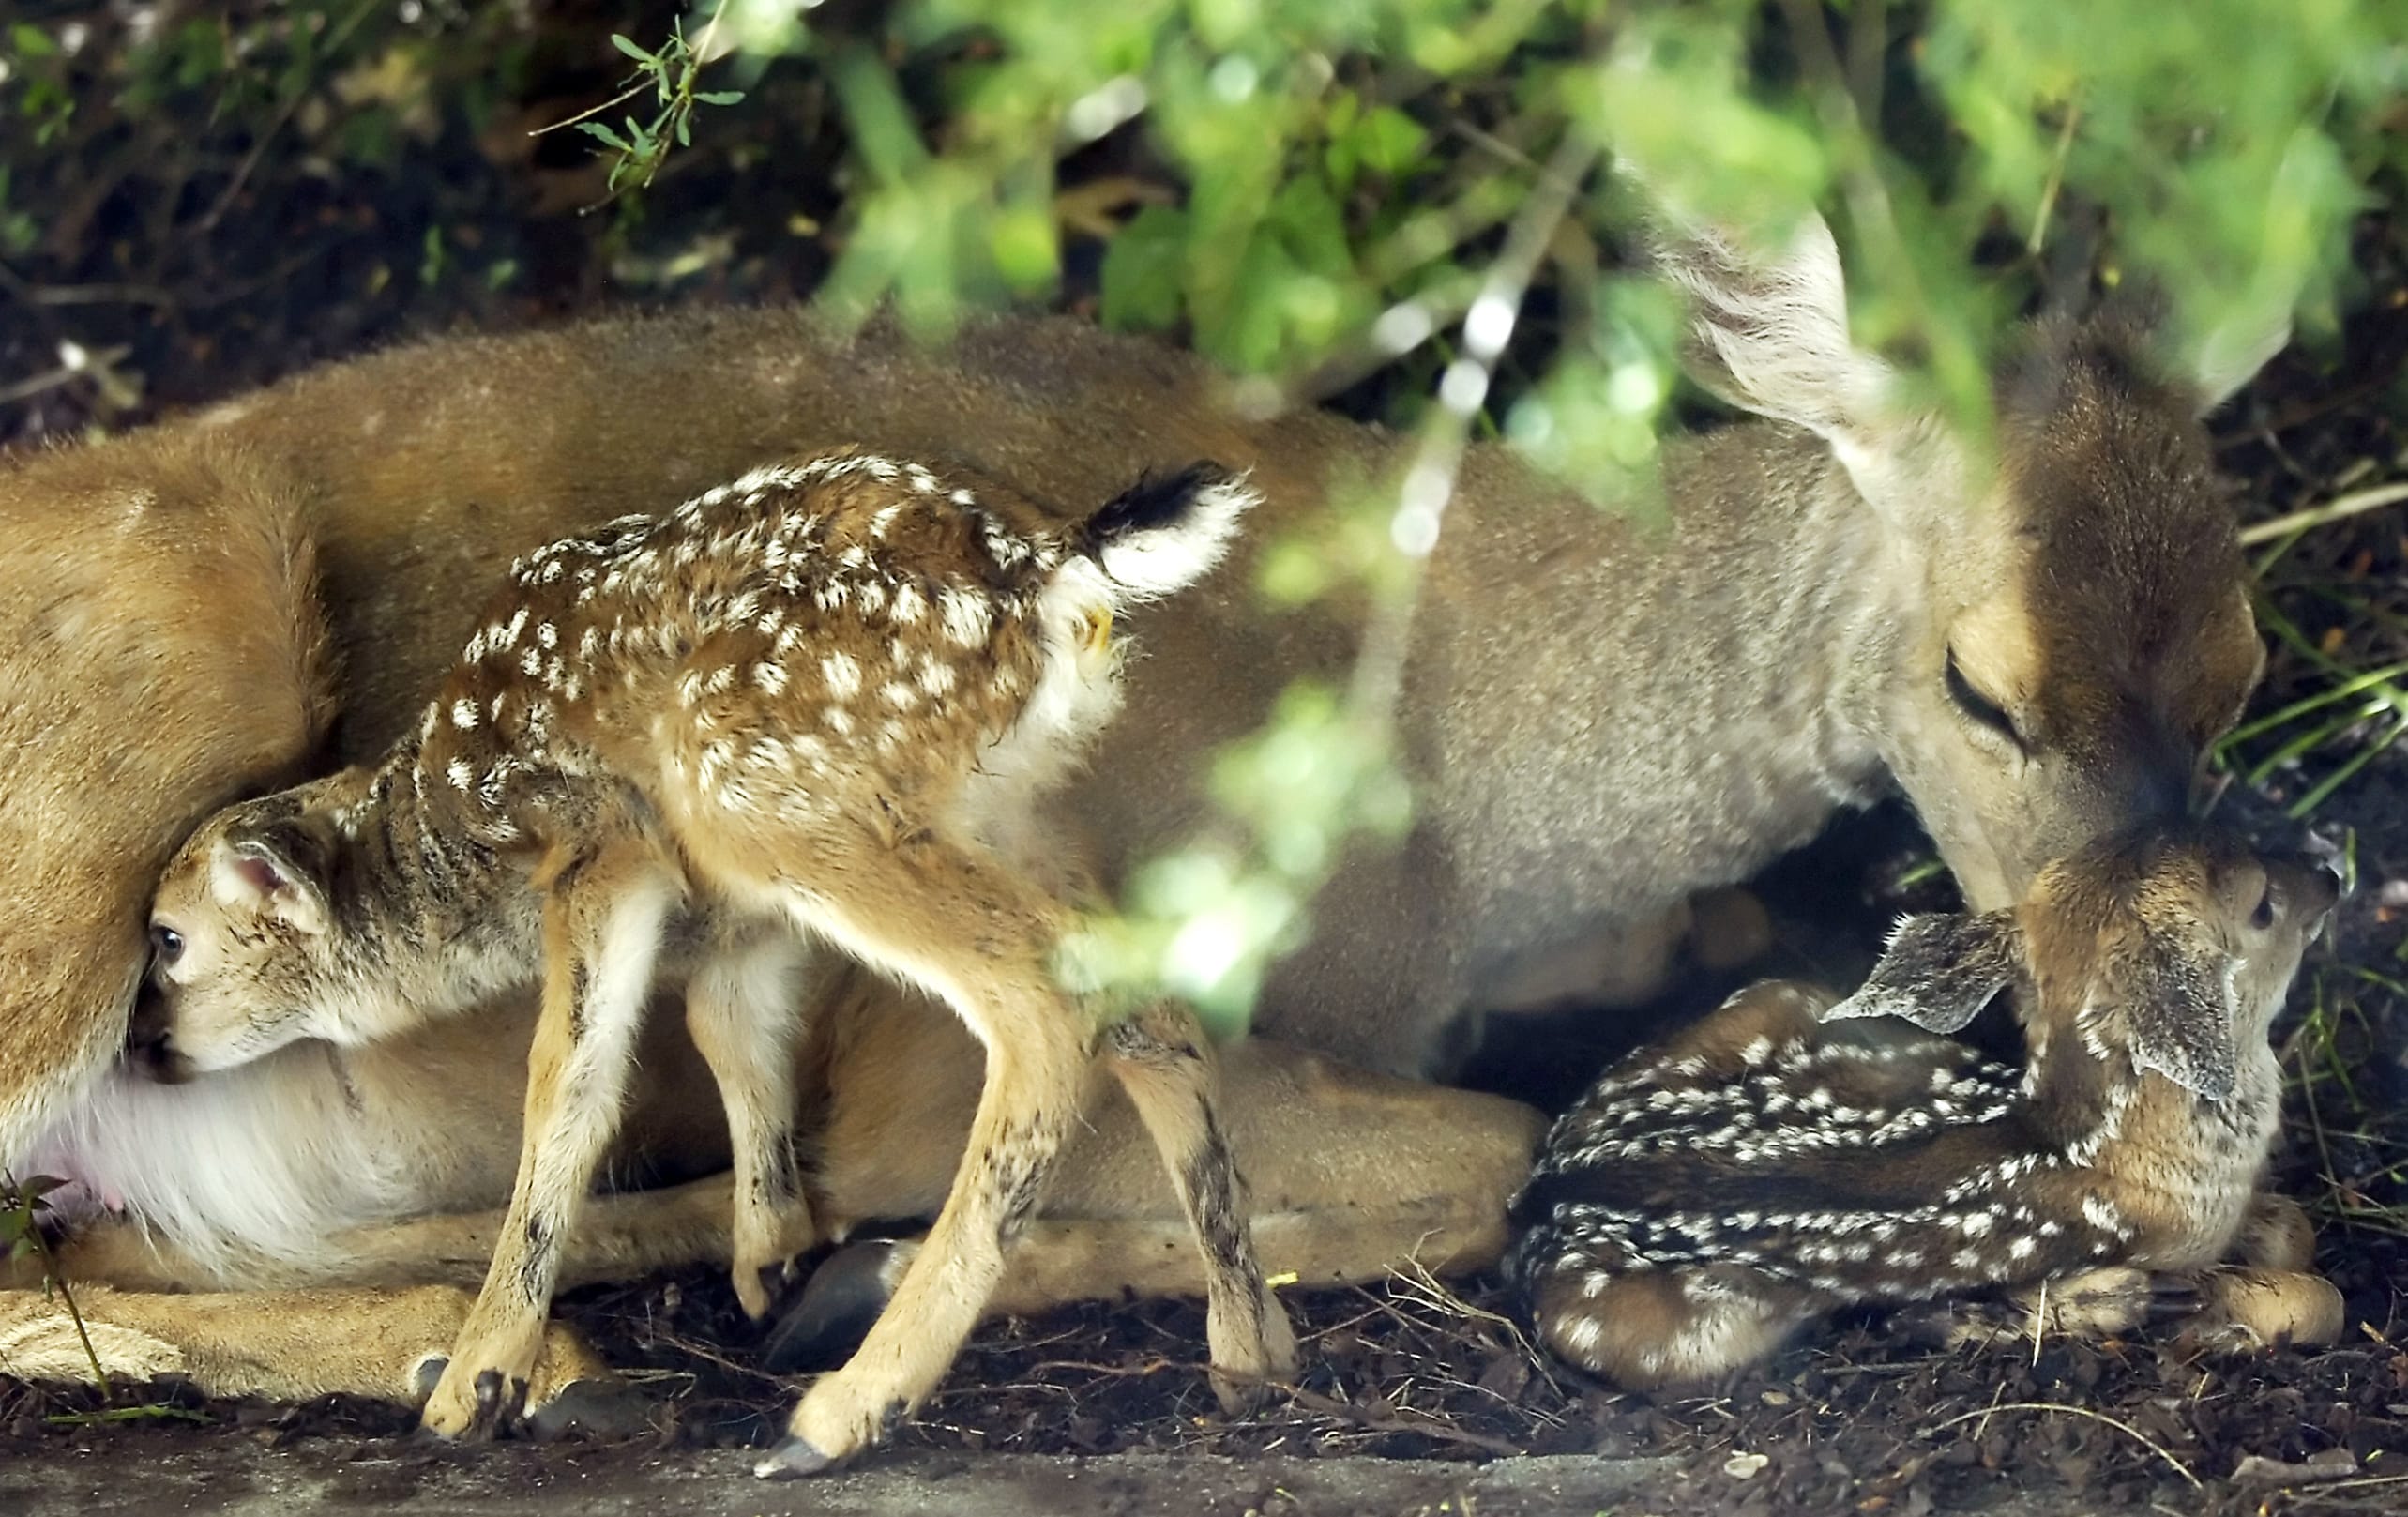 State wildlife officials say even apparently abandoned fawns probably have their mother nearby.